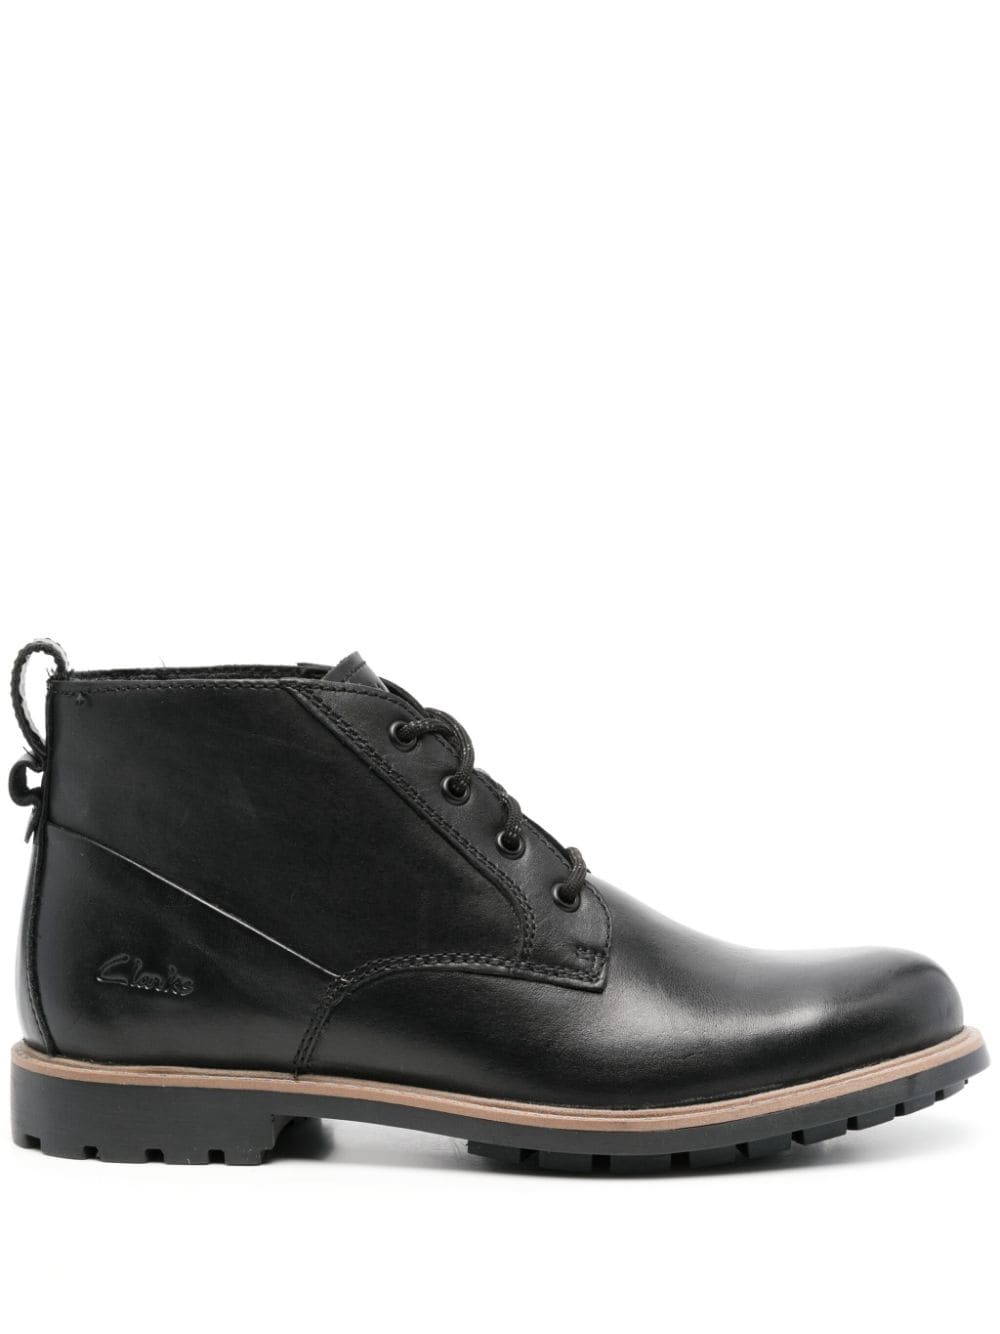 Clarks Westcombe leather ankle boots Black